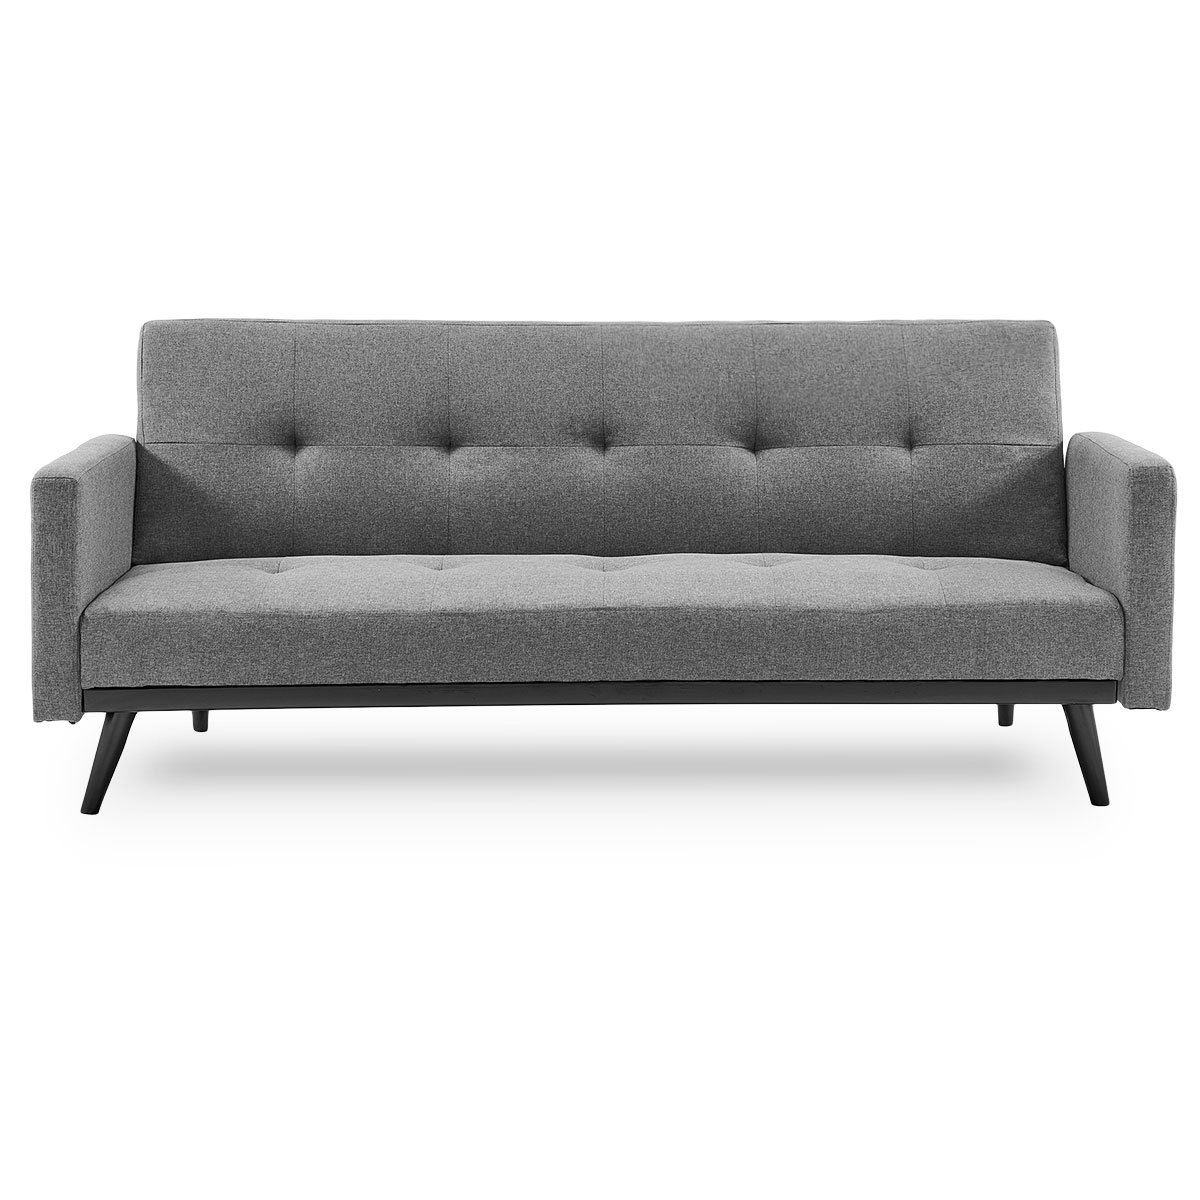 Sarantino Tufted Faux Linen 3-Seater Sofa Bed with Armrests - Light Grey 1